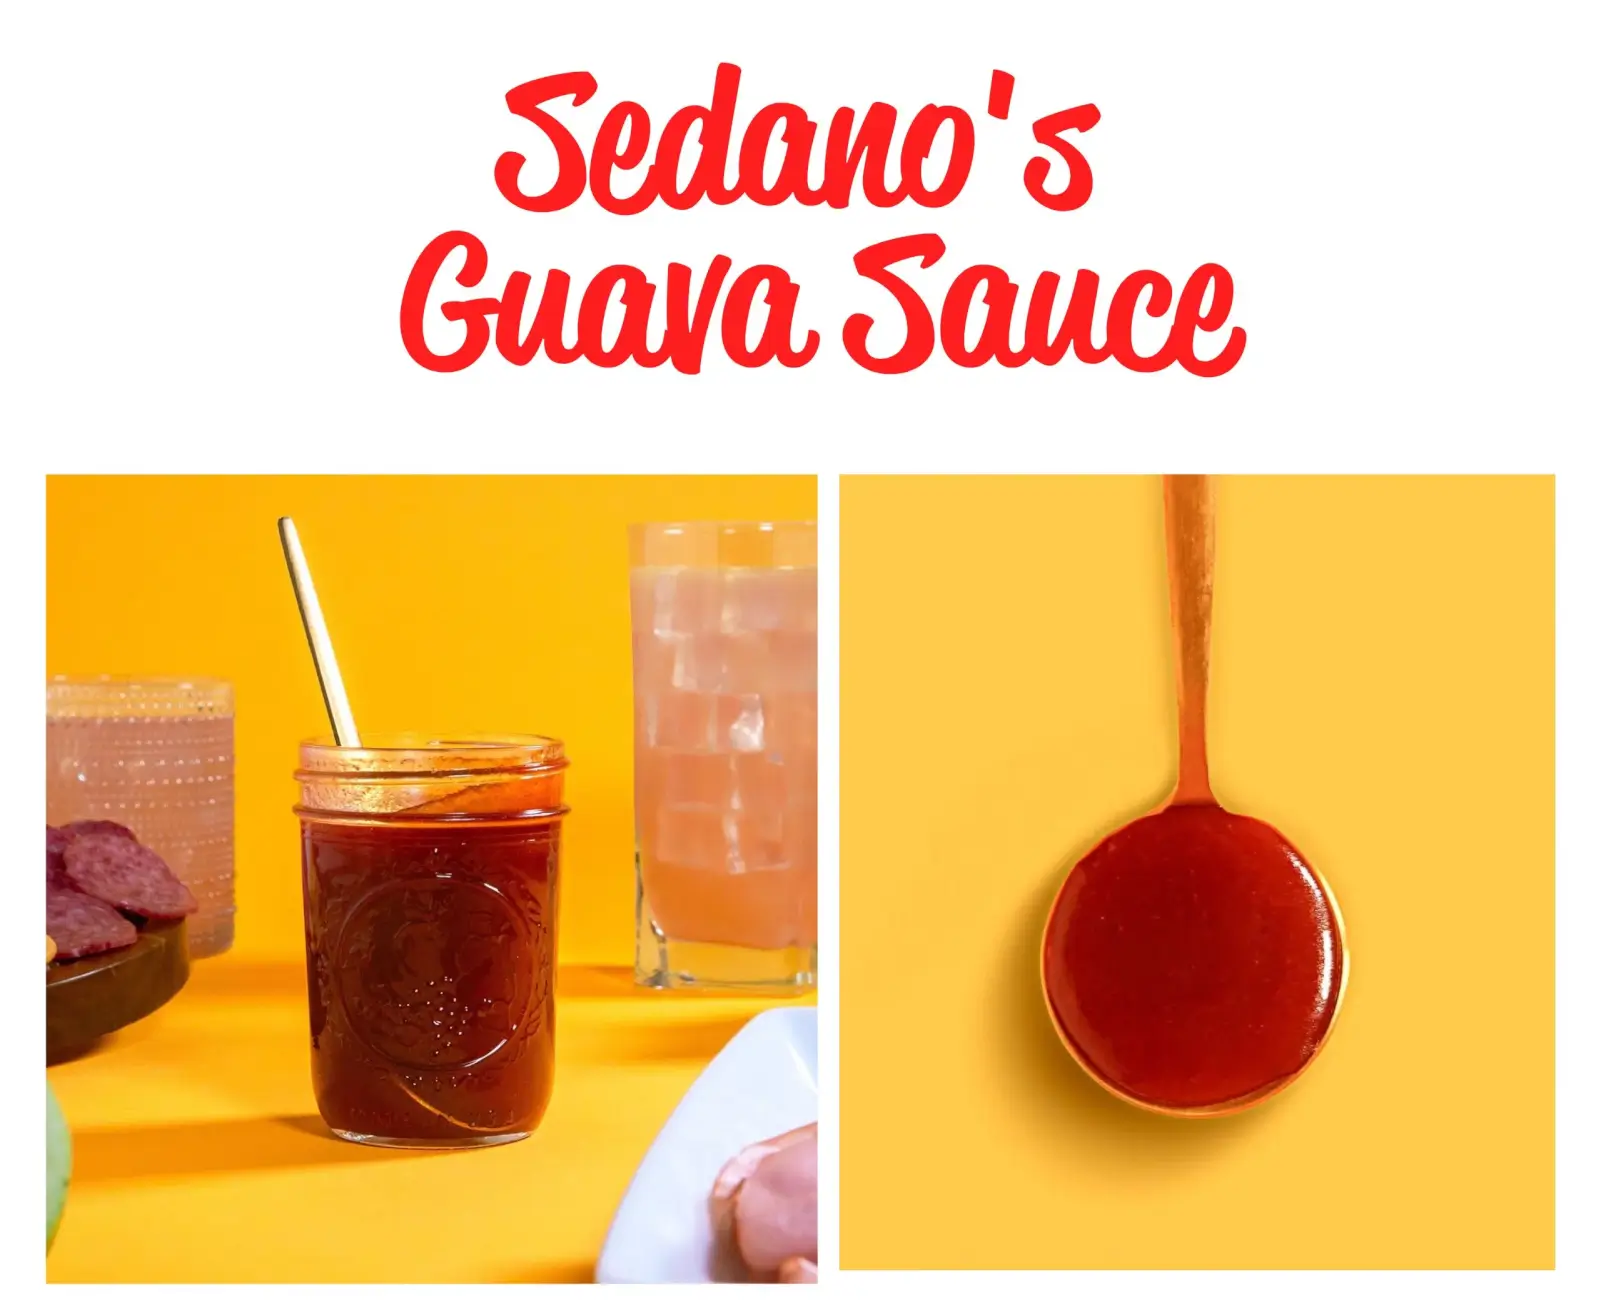 Sedanos Guava Sauce Shop Online Free Delivery at $55